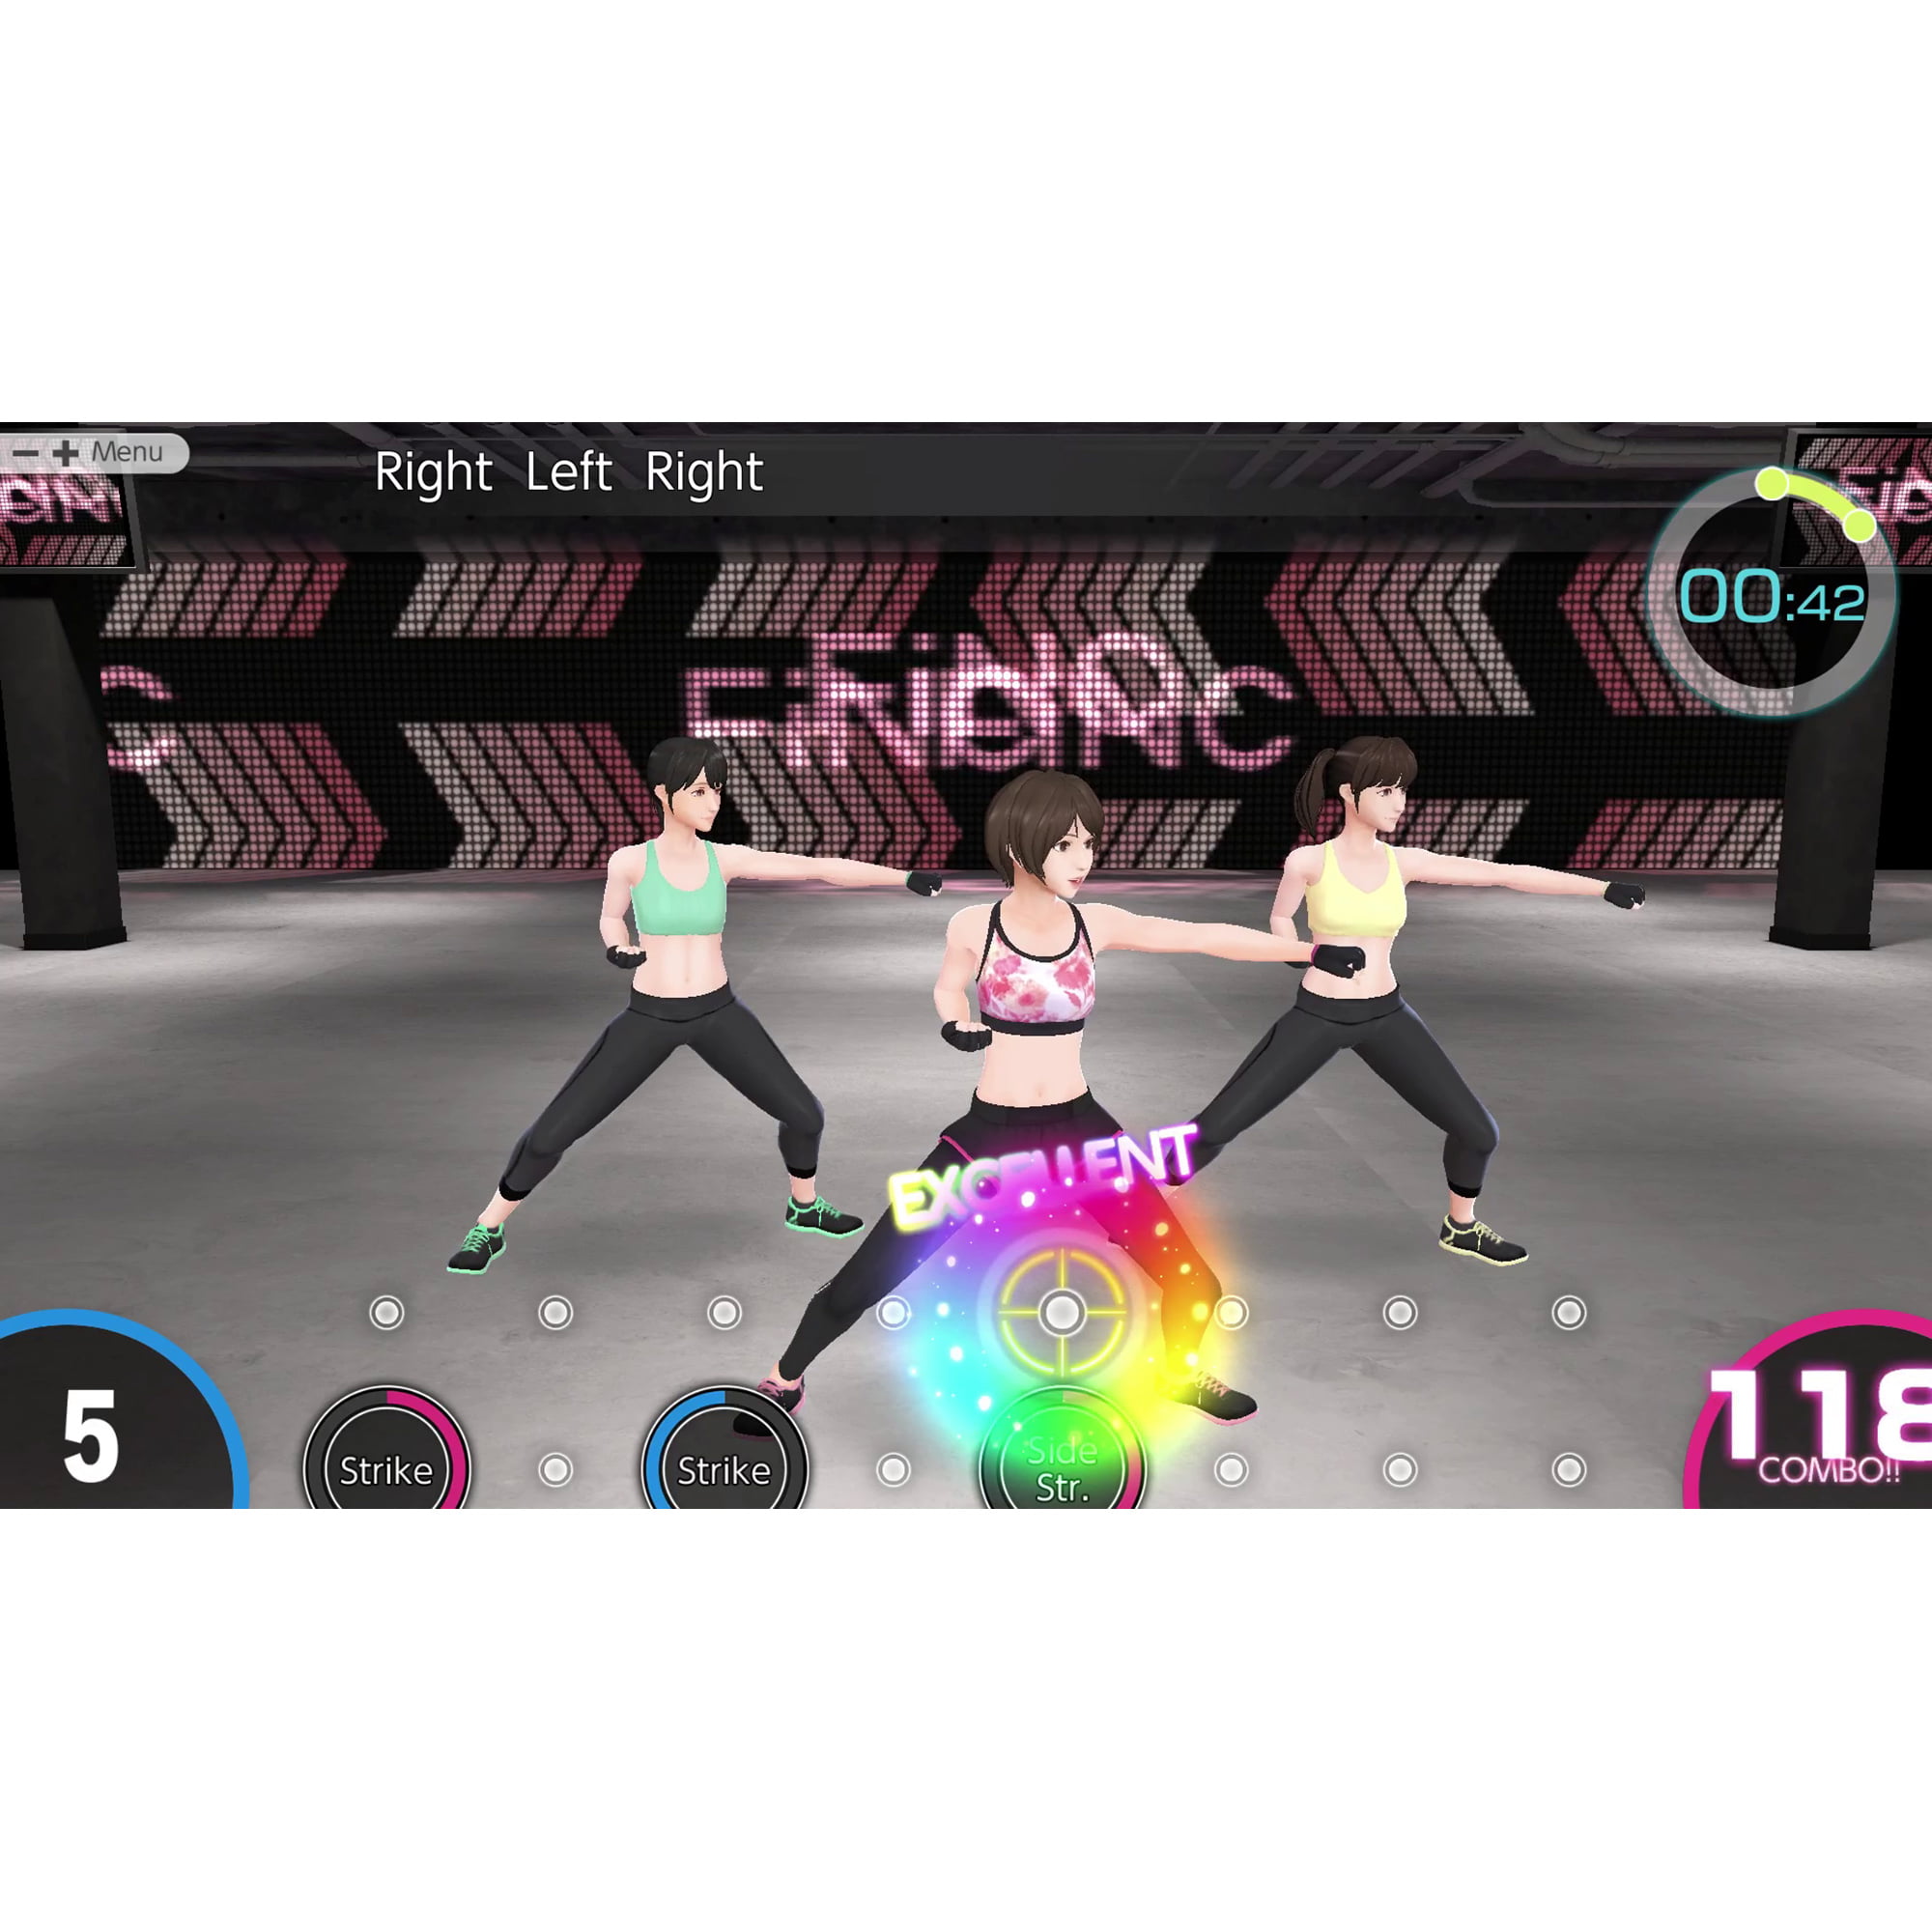 Knockout Home Fitness for Nintendo Switch - Nintendo Official Site